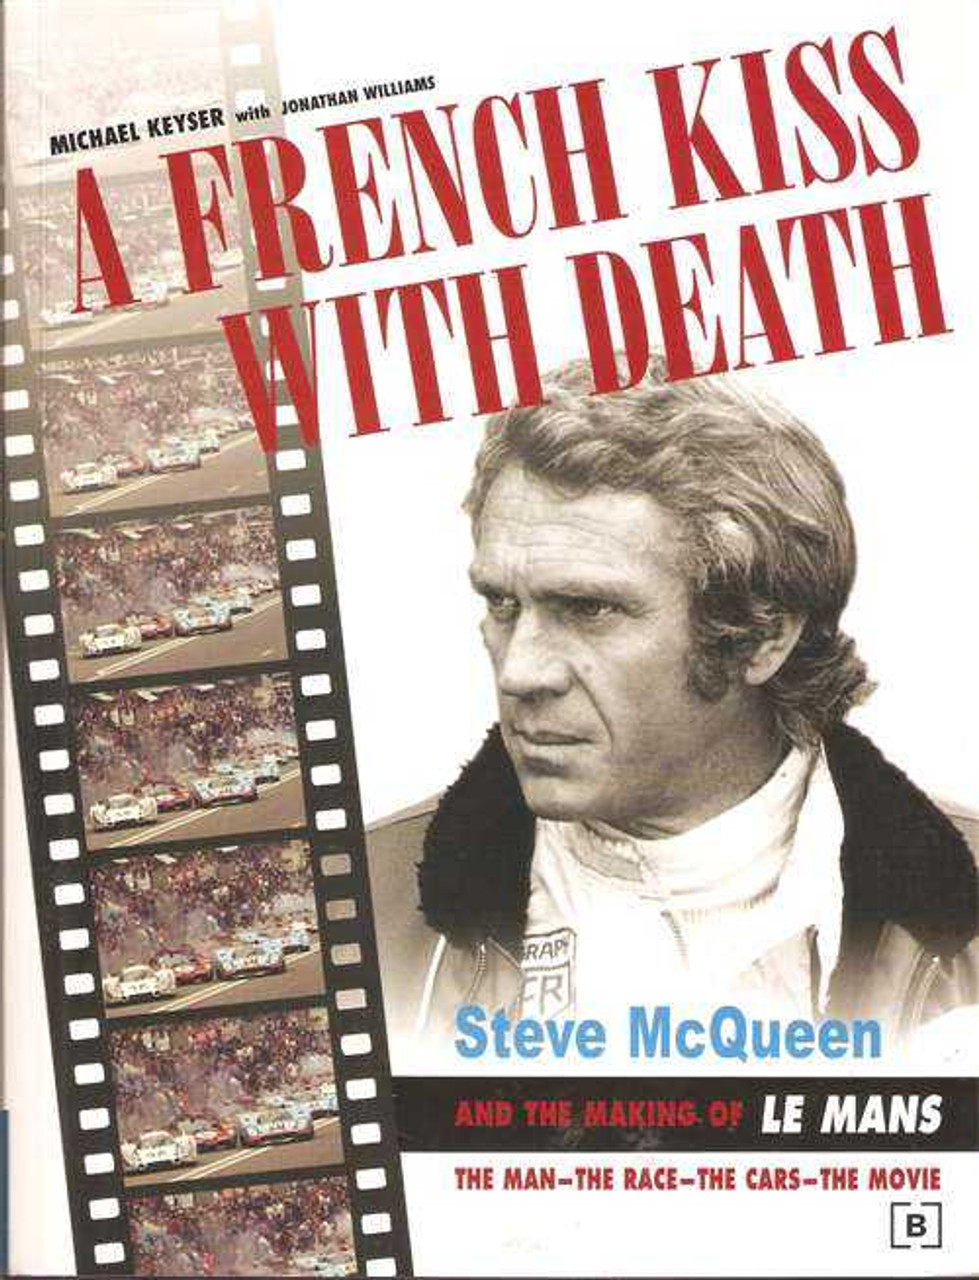 A French Kiss With Death: Steve McQueen and the Making of Le Mans